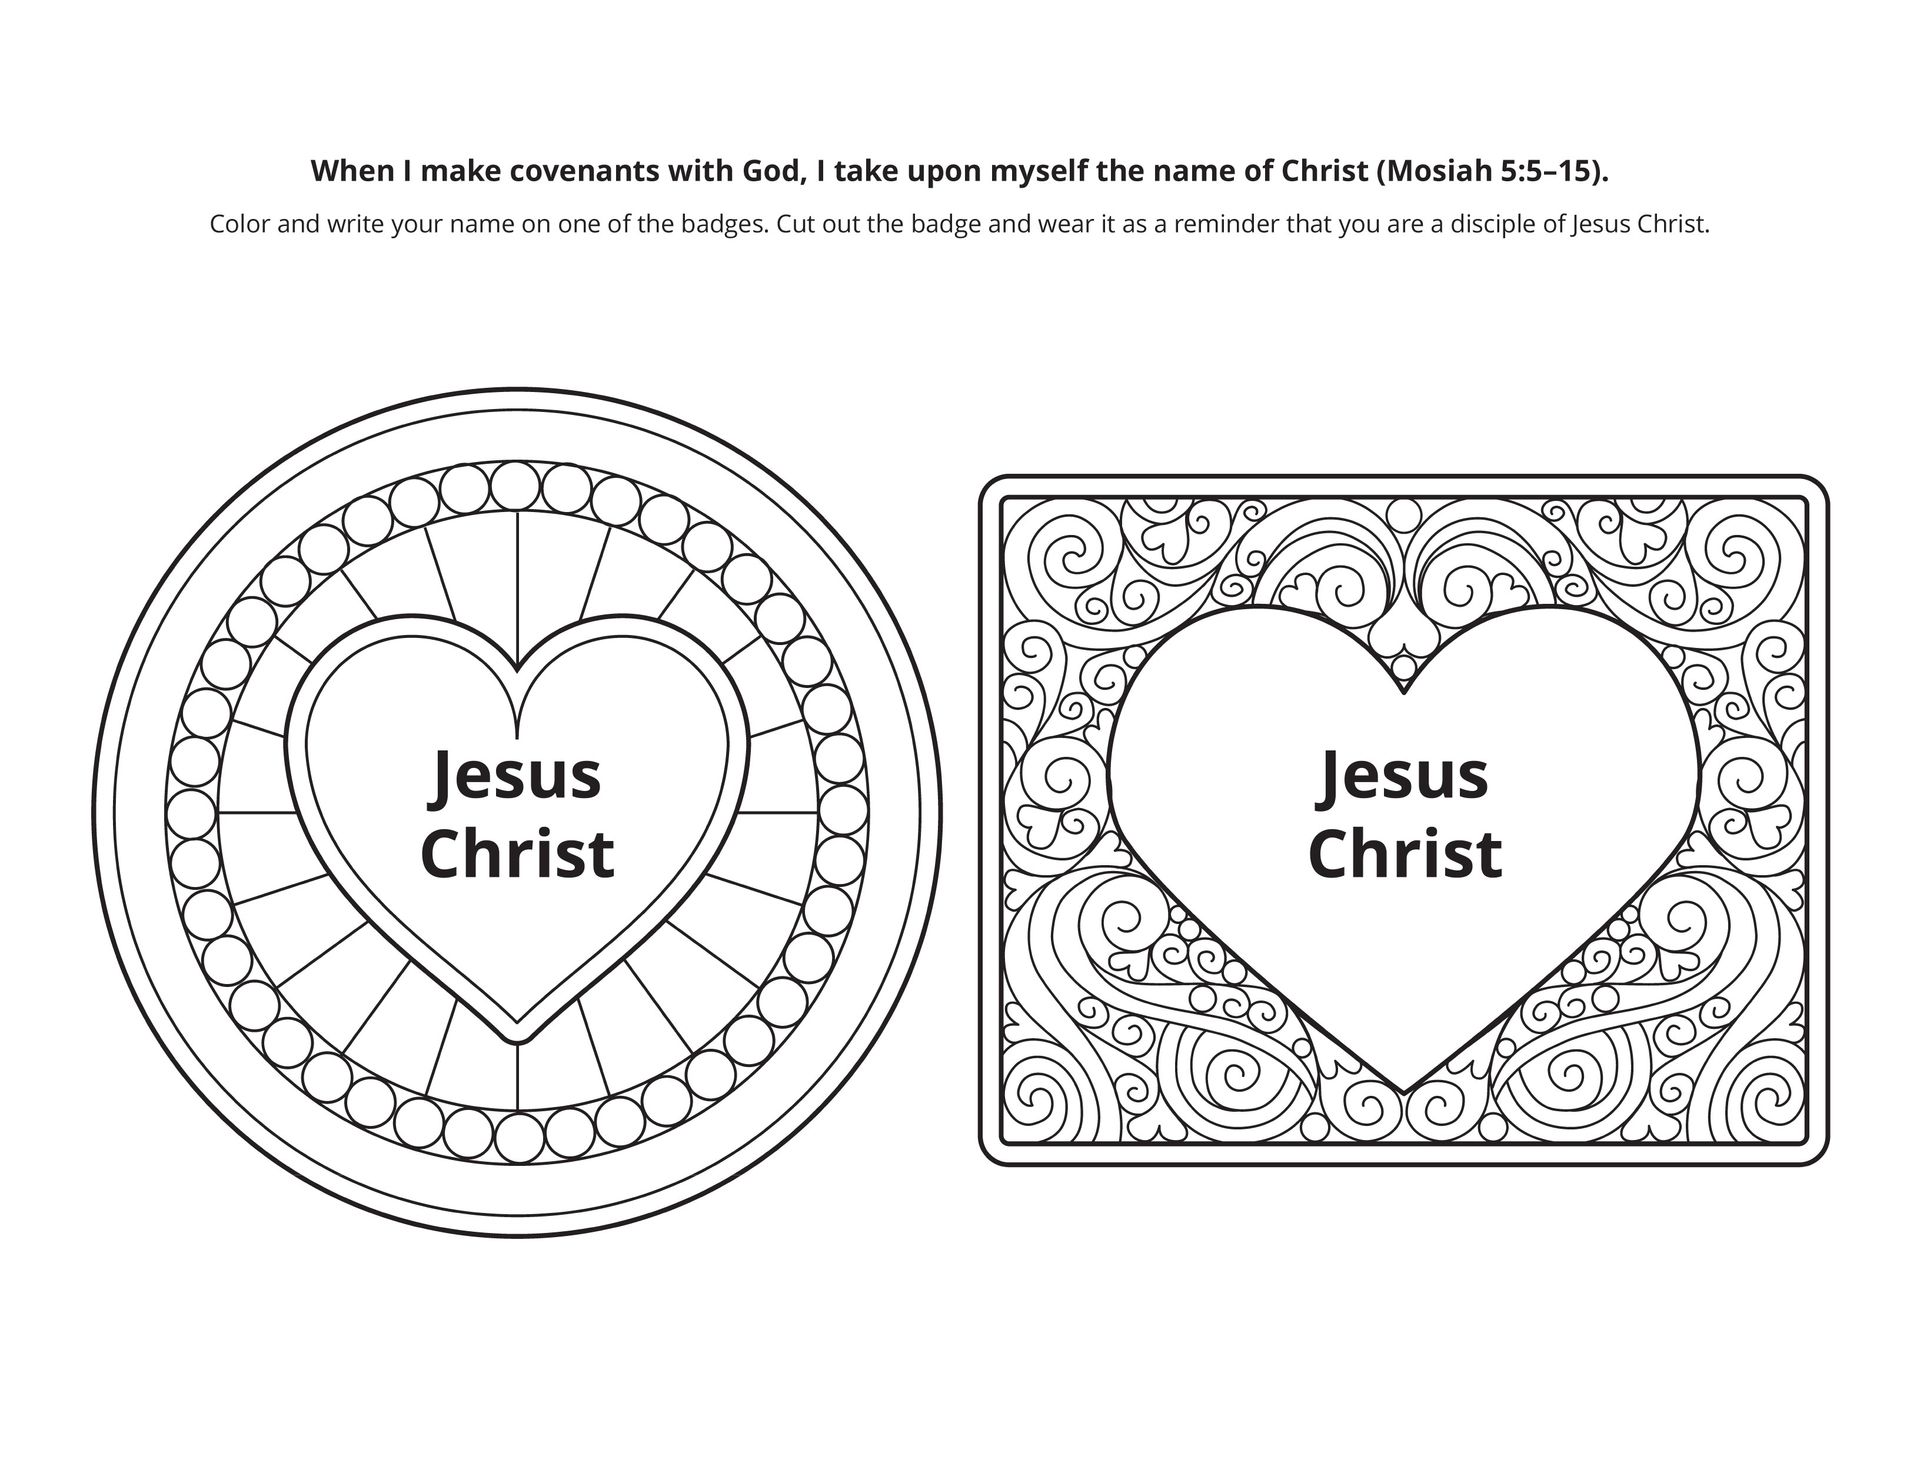 Line art of a heart, representing covenants with Christ.